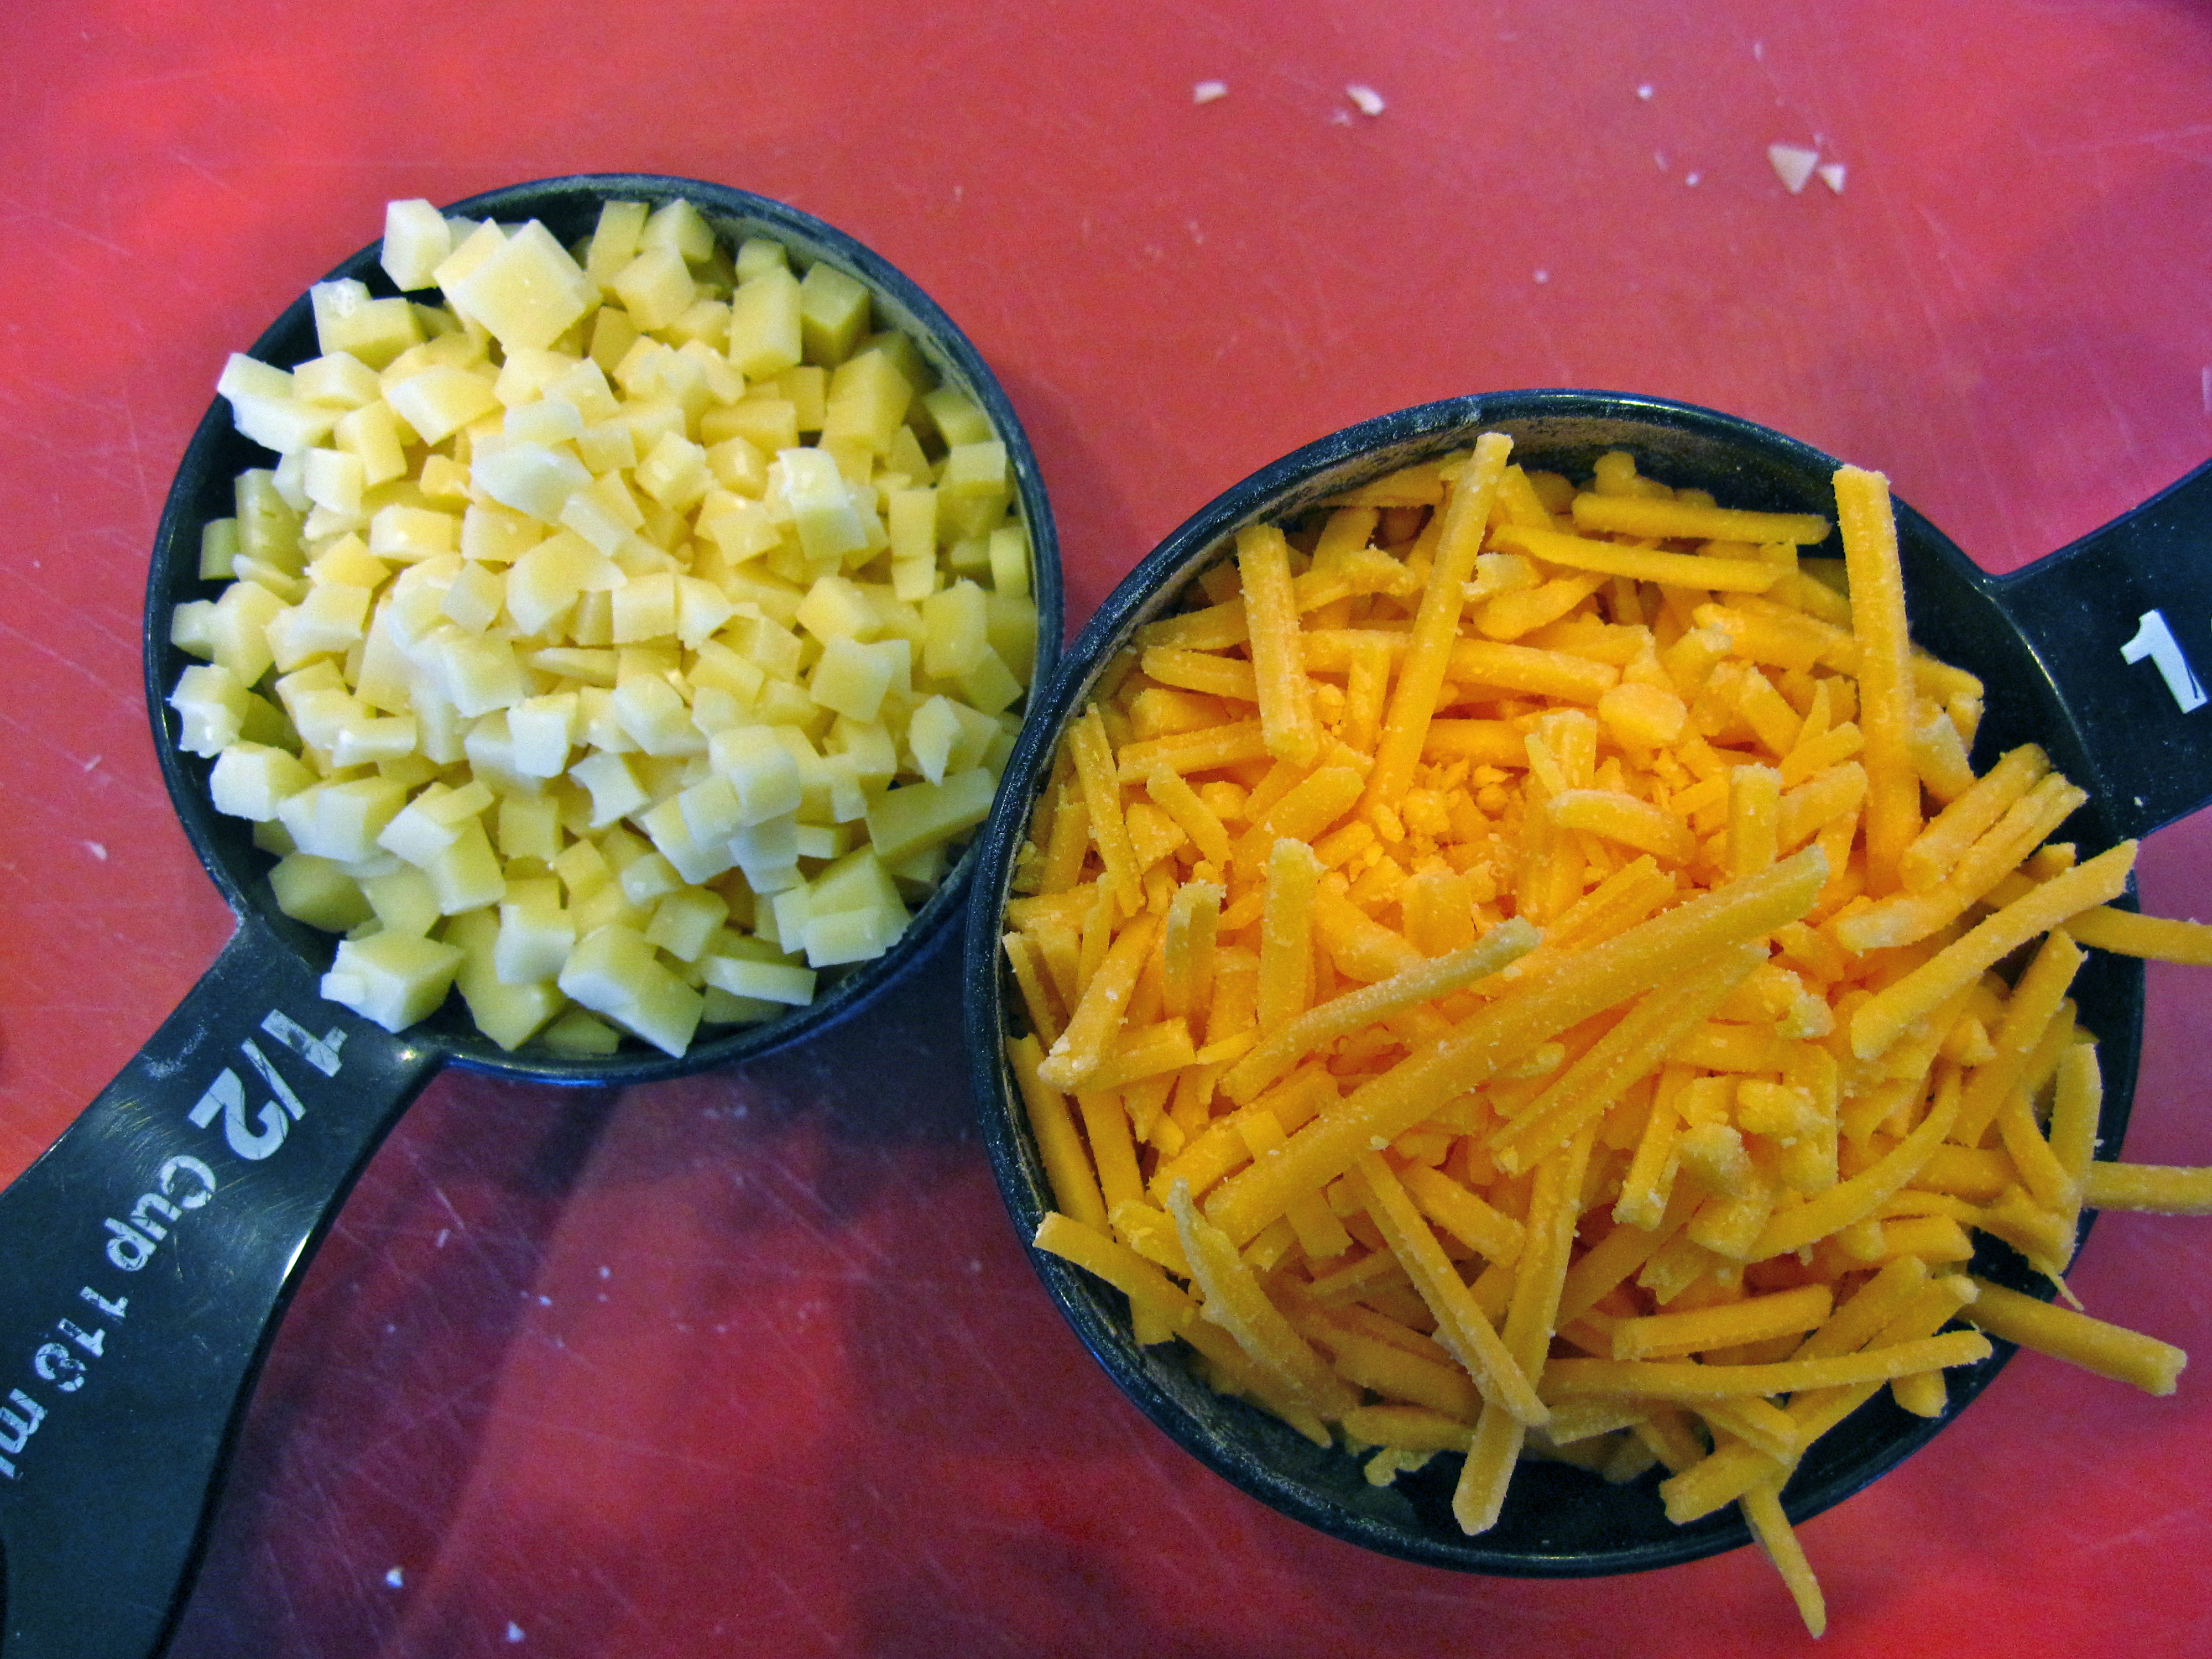 2 black measuring cups, one filled with cubed grana padano cheese, the other with shredded cheddar cheese. 